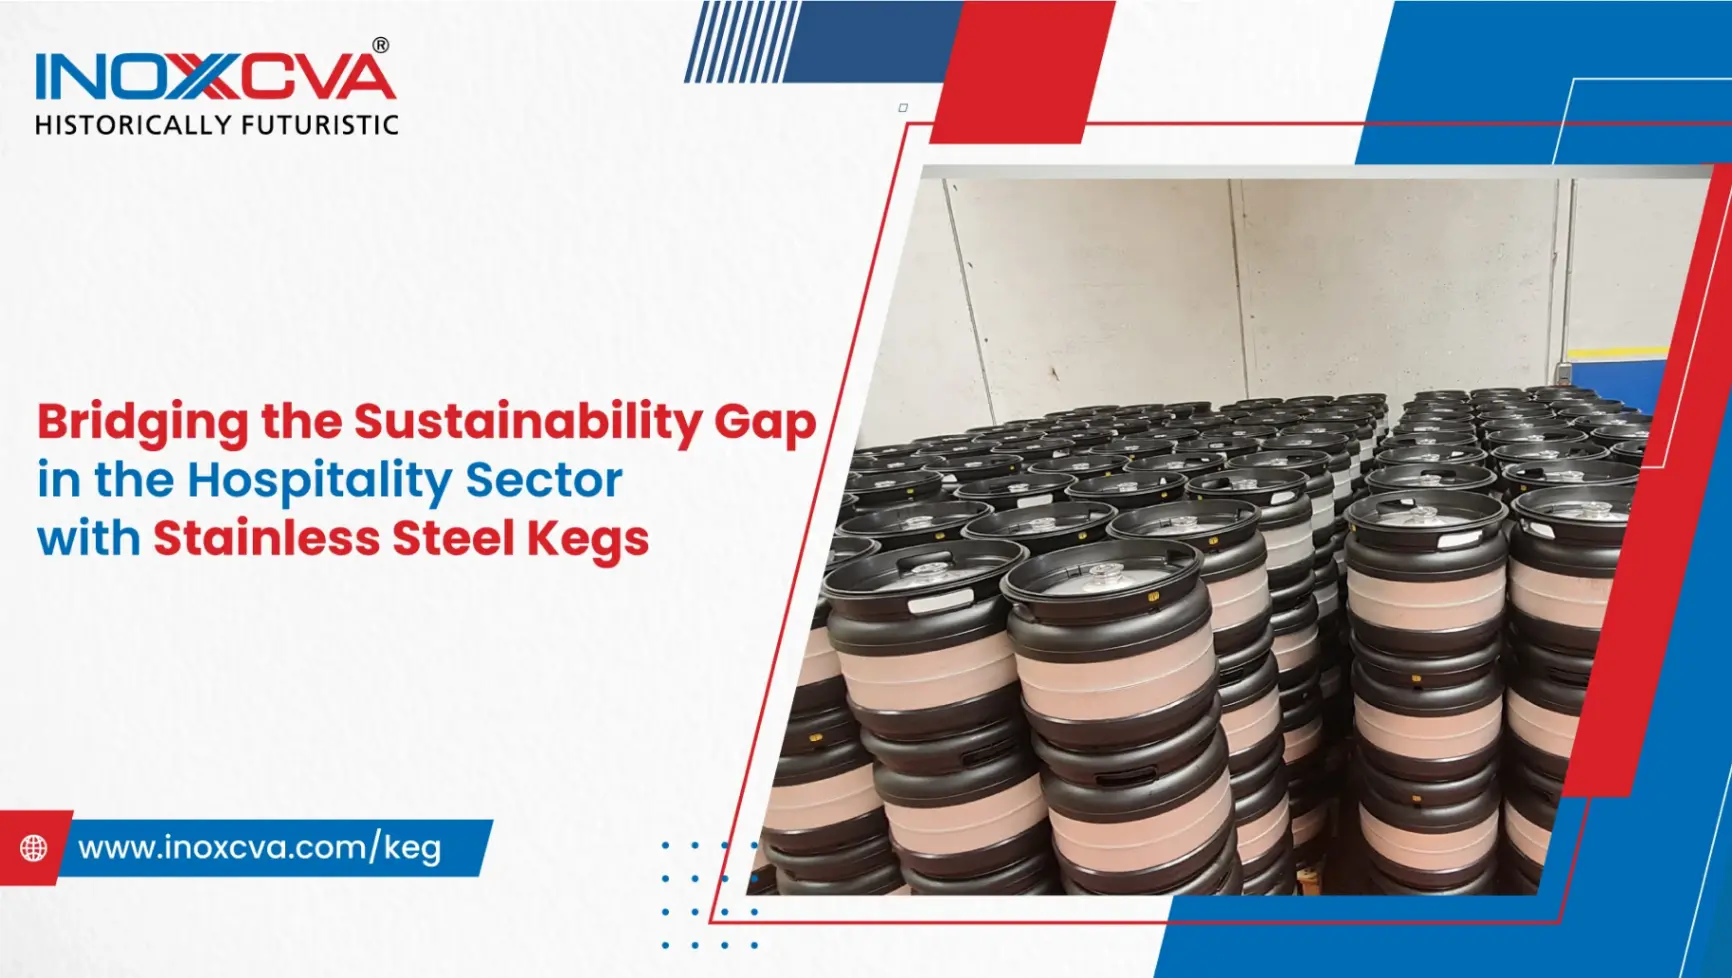 bridging the Sustainability Gap in the Hospitality Sector with Stainless Steel Kegs